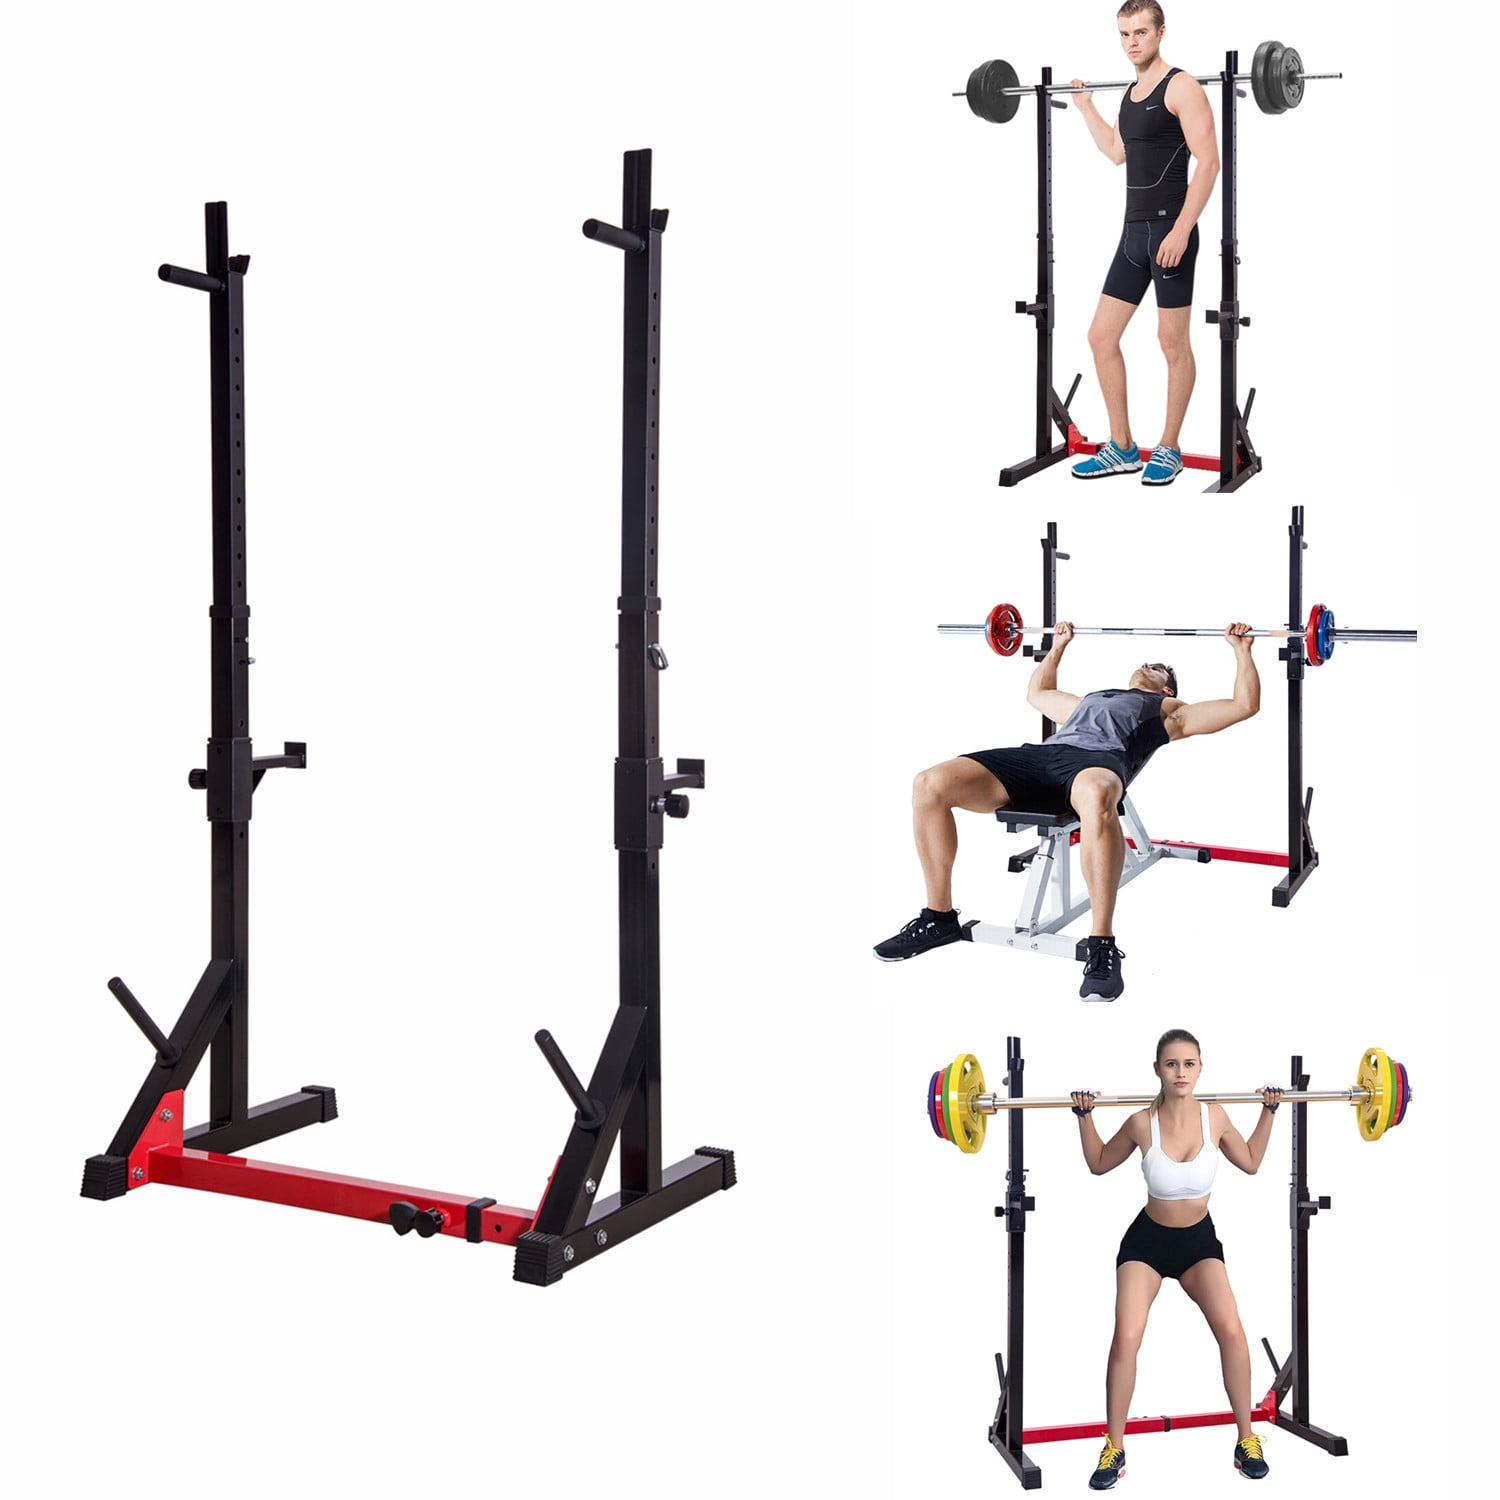 Merax Barbell Rack 550LBS Max Load Adjustable Squat Stand Dipping Station Gym Weight Bench Press Stand